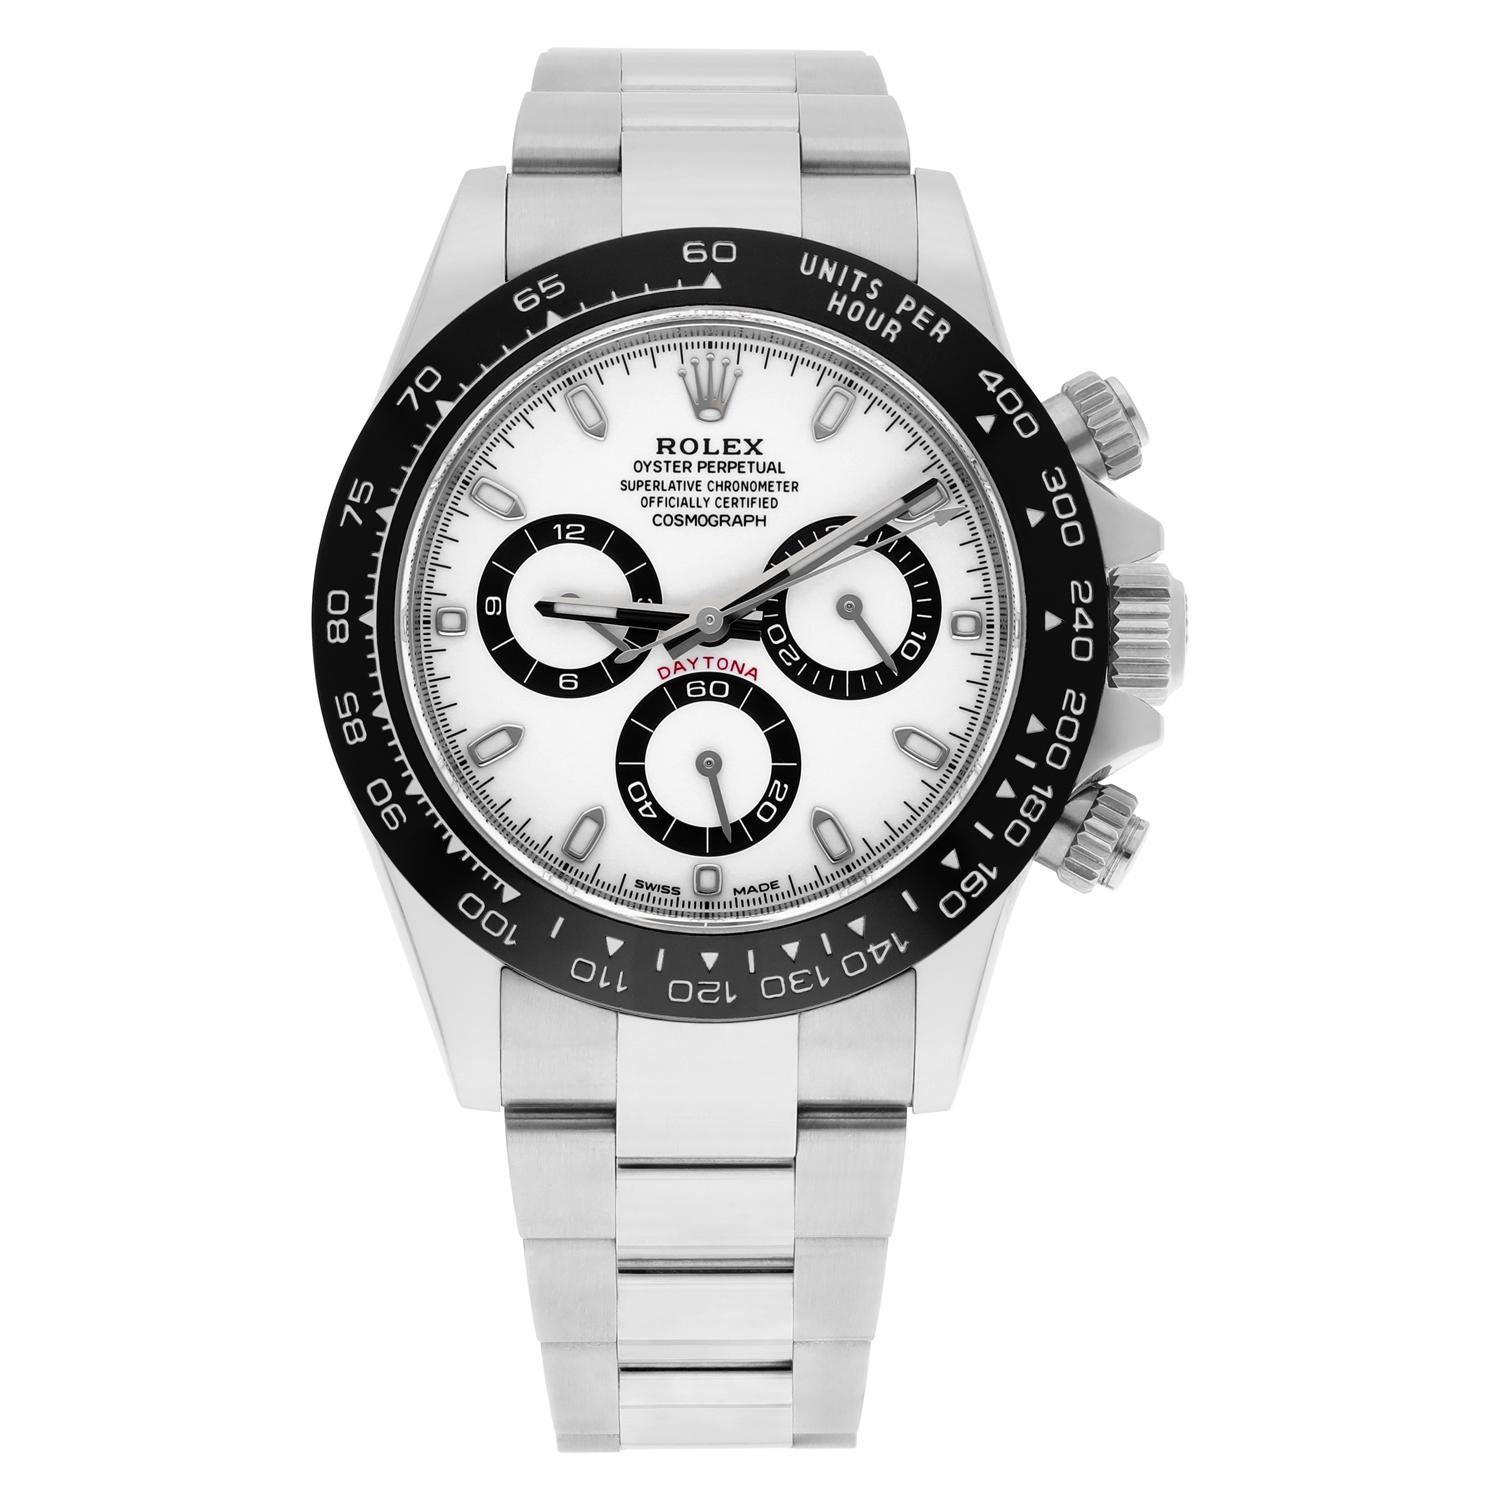 Rolex Oyster Perpetual Cosmograph Daytona 116500LN 40mm polished 904L stainless steel case, screw-down back and push buttons, screw-down crown and push buttons with Triplock triple waterproofness, black monobloc ceramic Cerachrom bezel with engraved